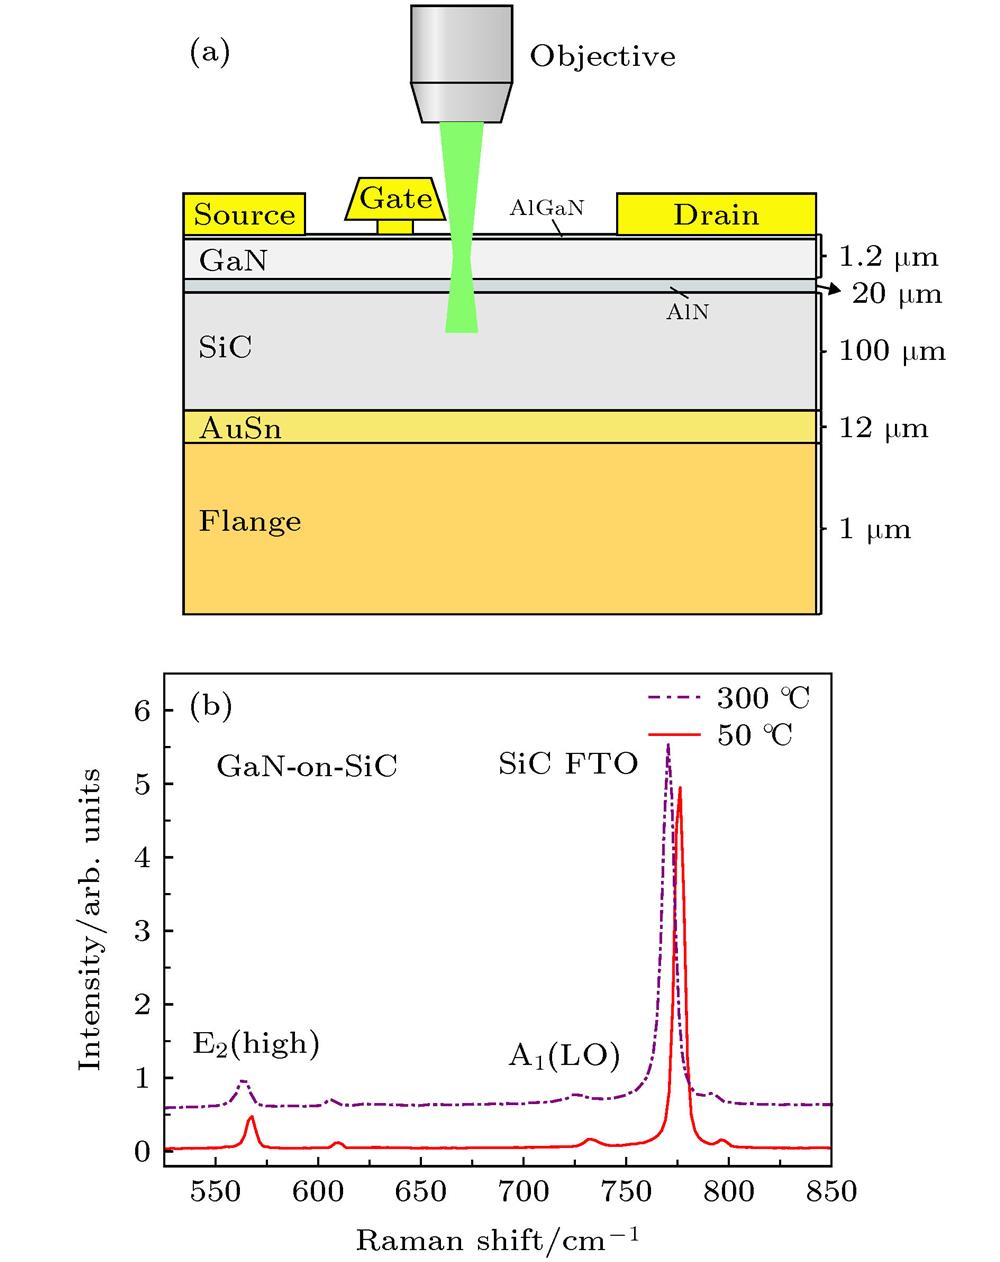 (a) Schematic structure of the GaN-on-SiC HEMT under test in the Raman optothermal measurement; (b) Raman peaks of the GaN-on-SiC HEMT at 50 ℃ and 300 ℃, including the E2(high) and A1(LO) peaks of the GaN epitaxy and the FTO peak of the SiC substrate.(a)被测GaN高电子迁移率场效应管器件结构以及拉曼热测量的示意图; (b)被测器件在50 ℃和300 ℃的拉曼特征峰: 包括GaN外延的E2(high)和A1(LO)峰, 以及SiC衬底的FTO峰